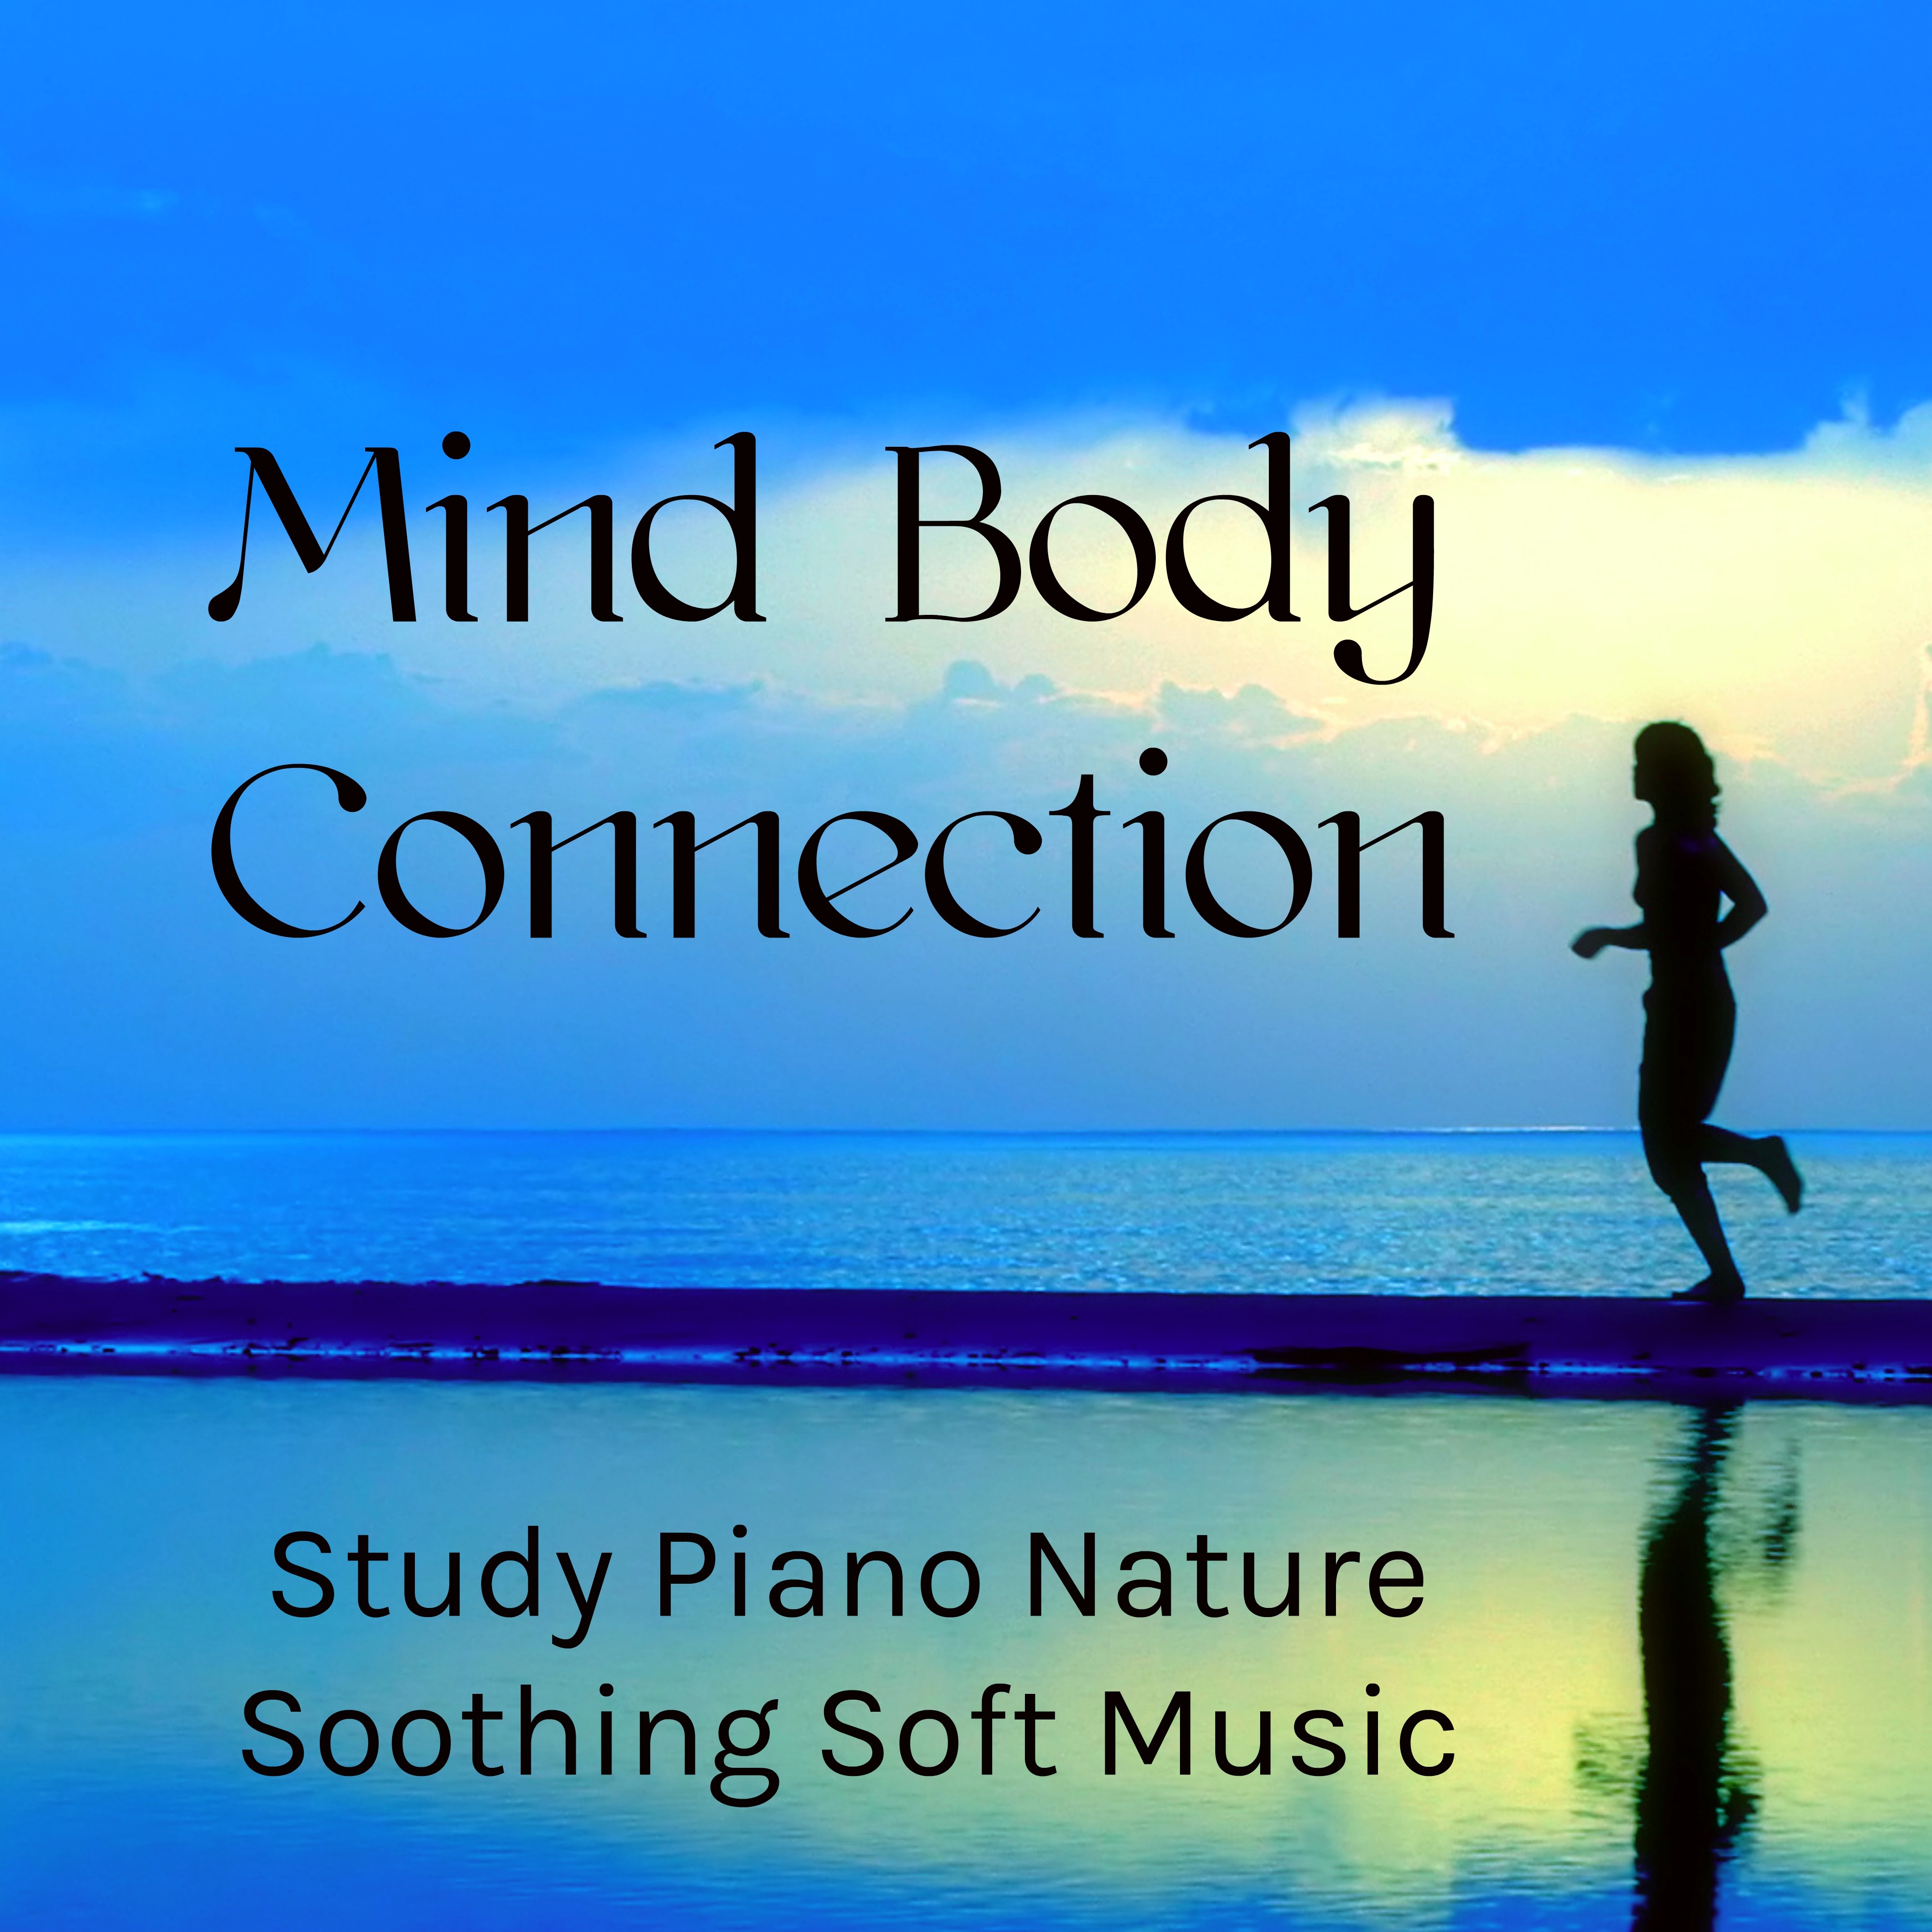 Mind Body Connection - Study Piano Nature Soothing Soft Music for Brainwave Entrainment Meditation Tips and Yoga Chakras